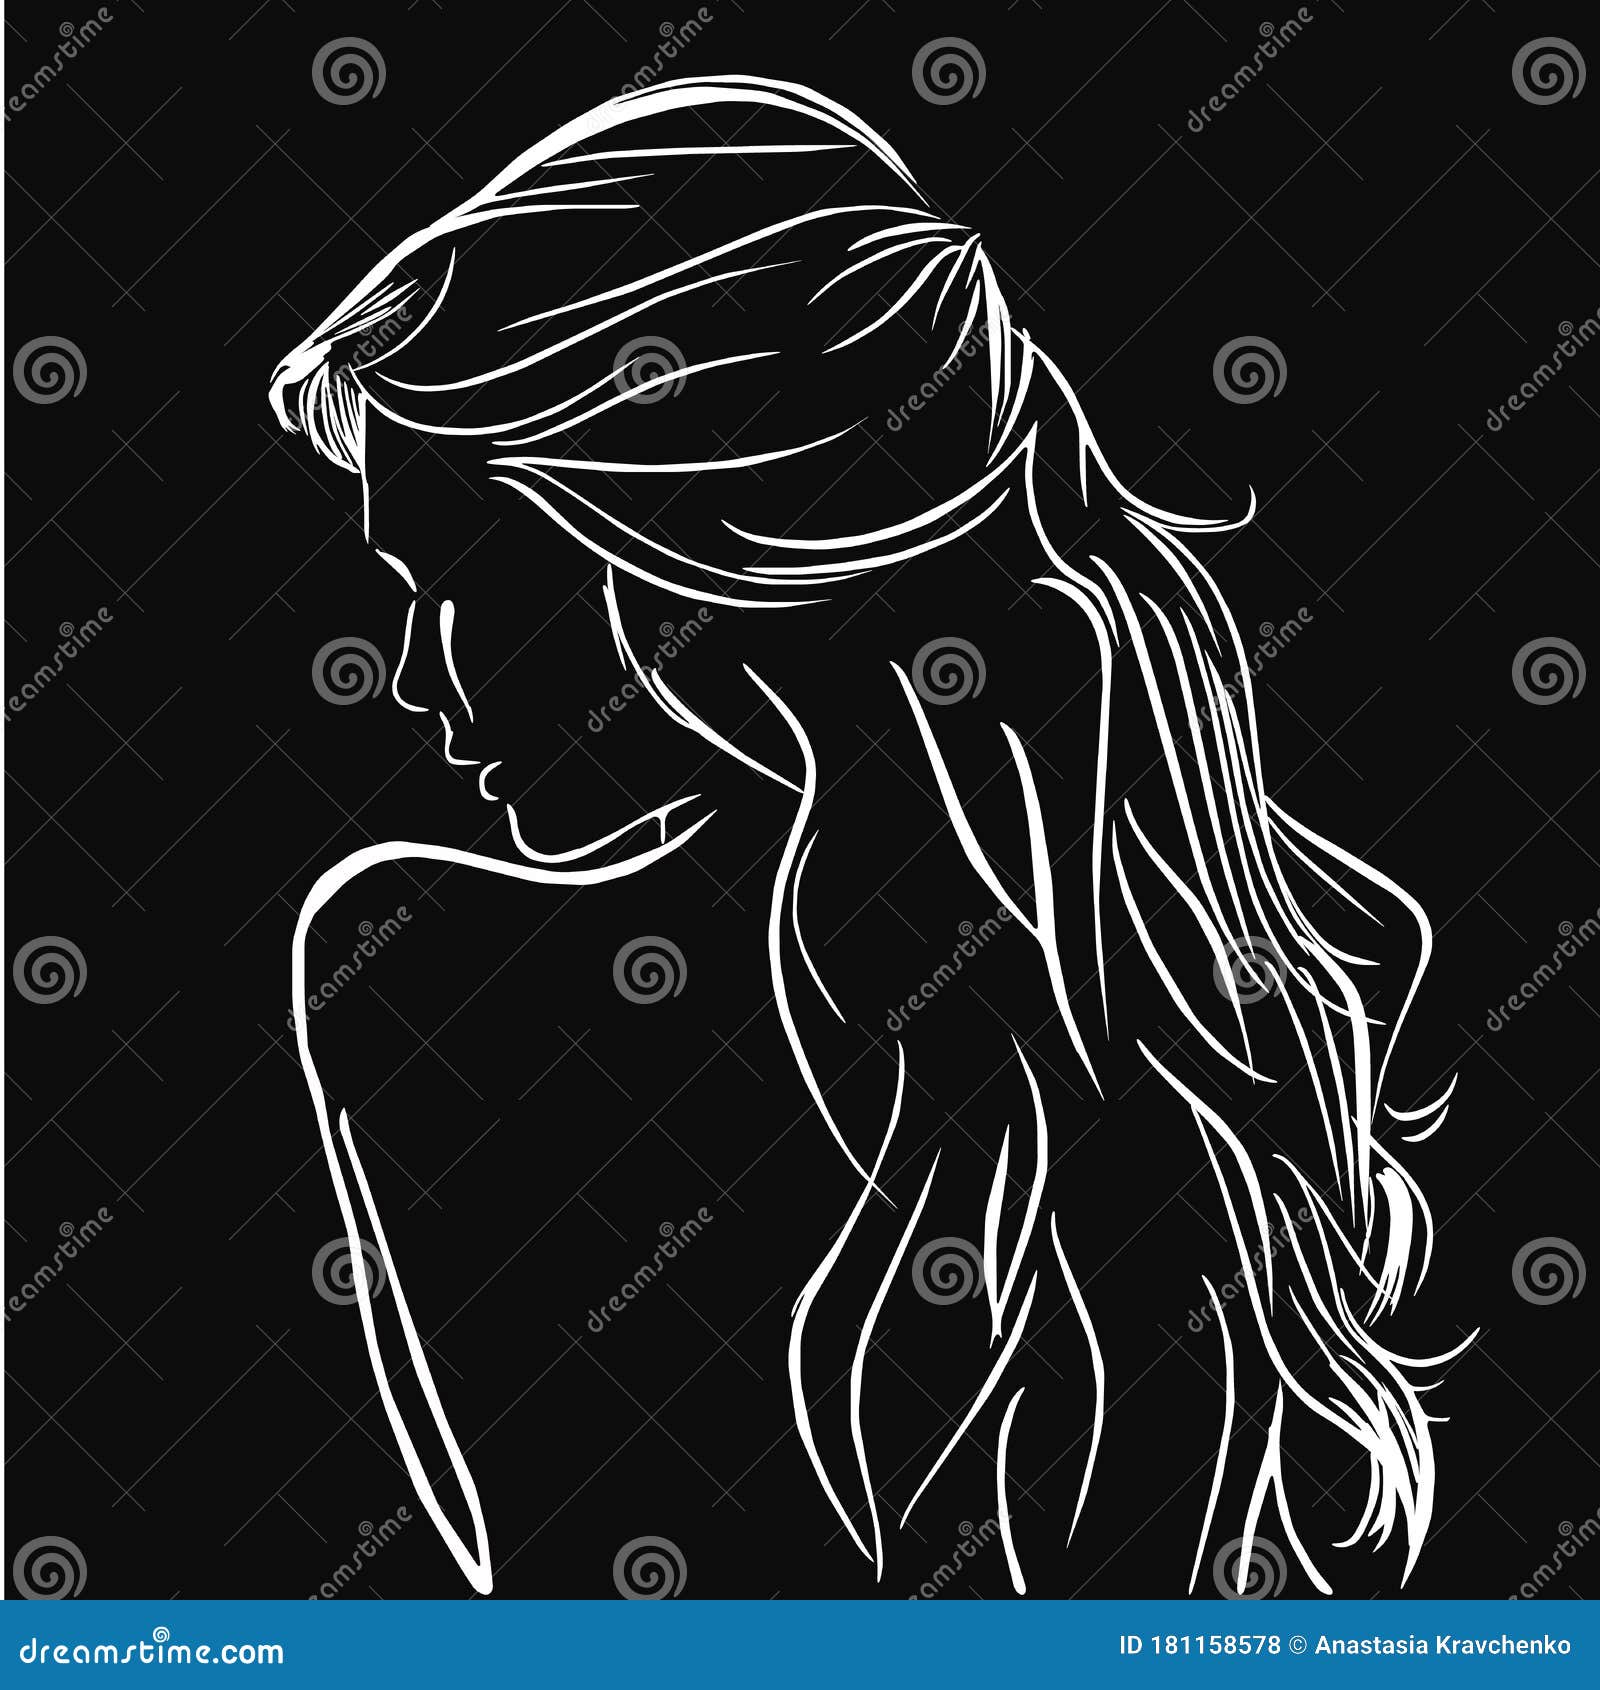 Background with Beautiful Back of Girl White Line on Black Logo Concept  Icon Nature Hair Stock Vector - Illustration of background, abstract:  181158578